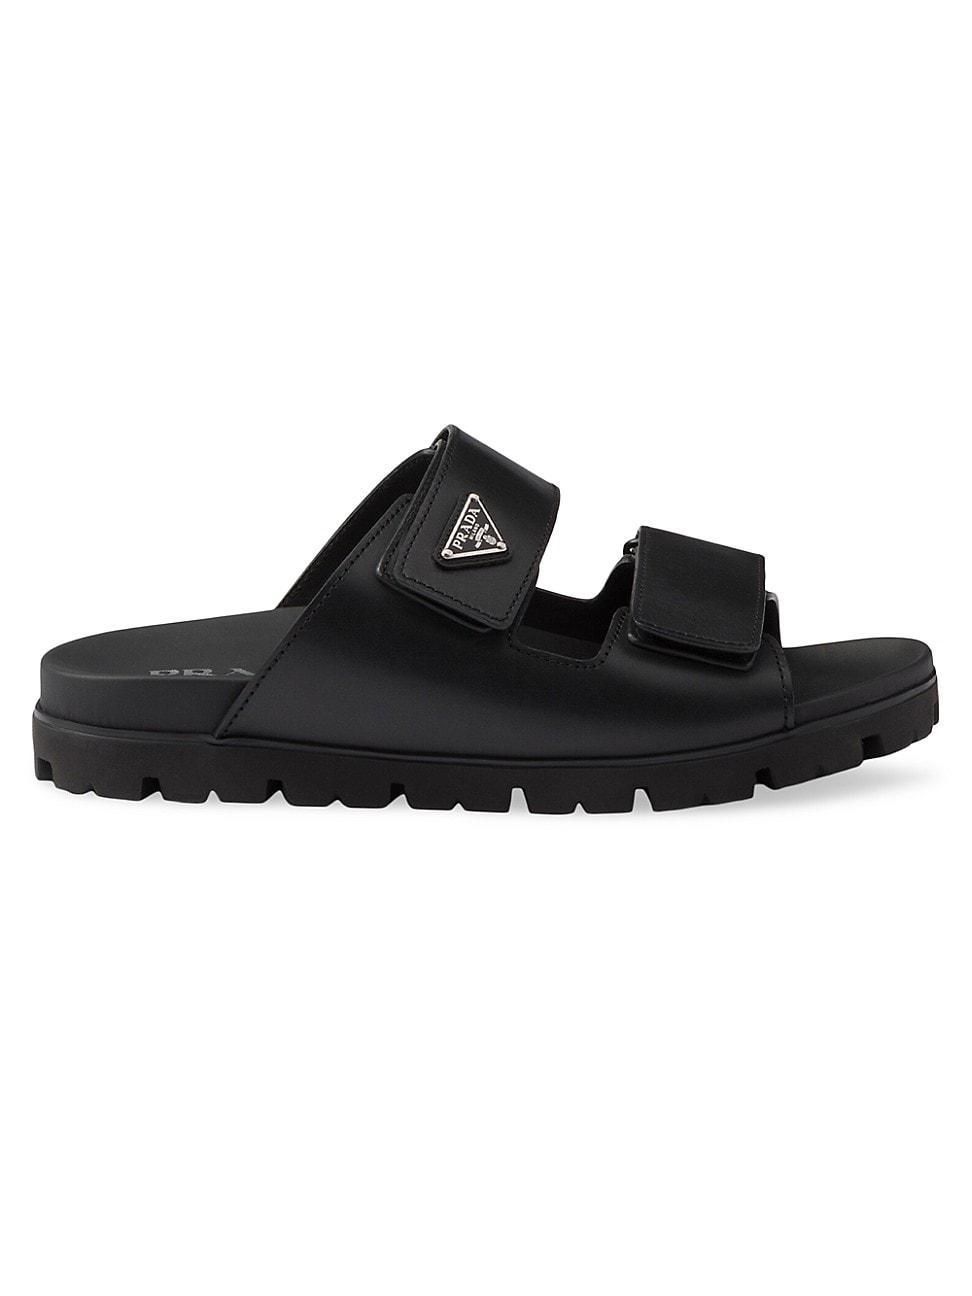 Mens Leather Strap Sandals Product Image